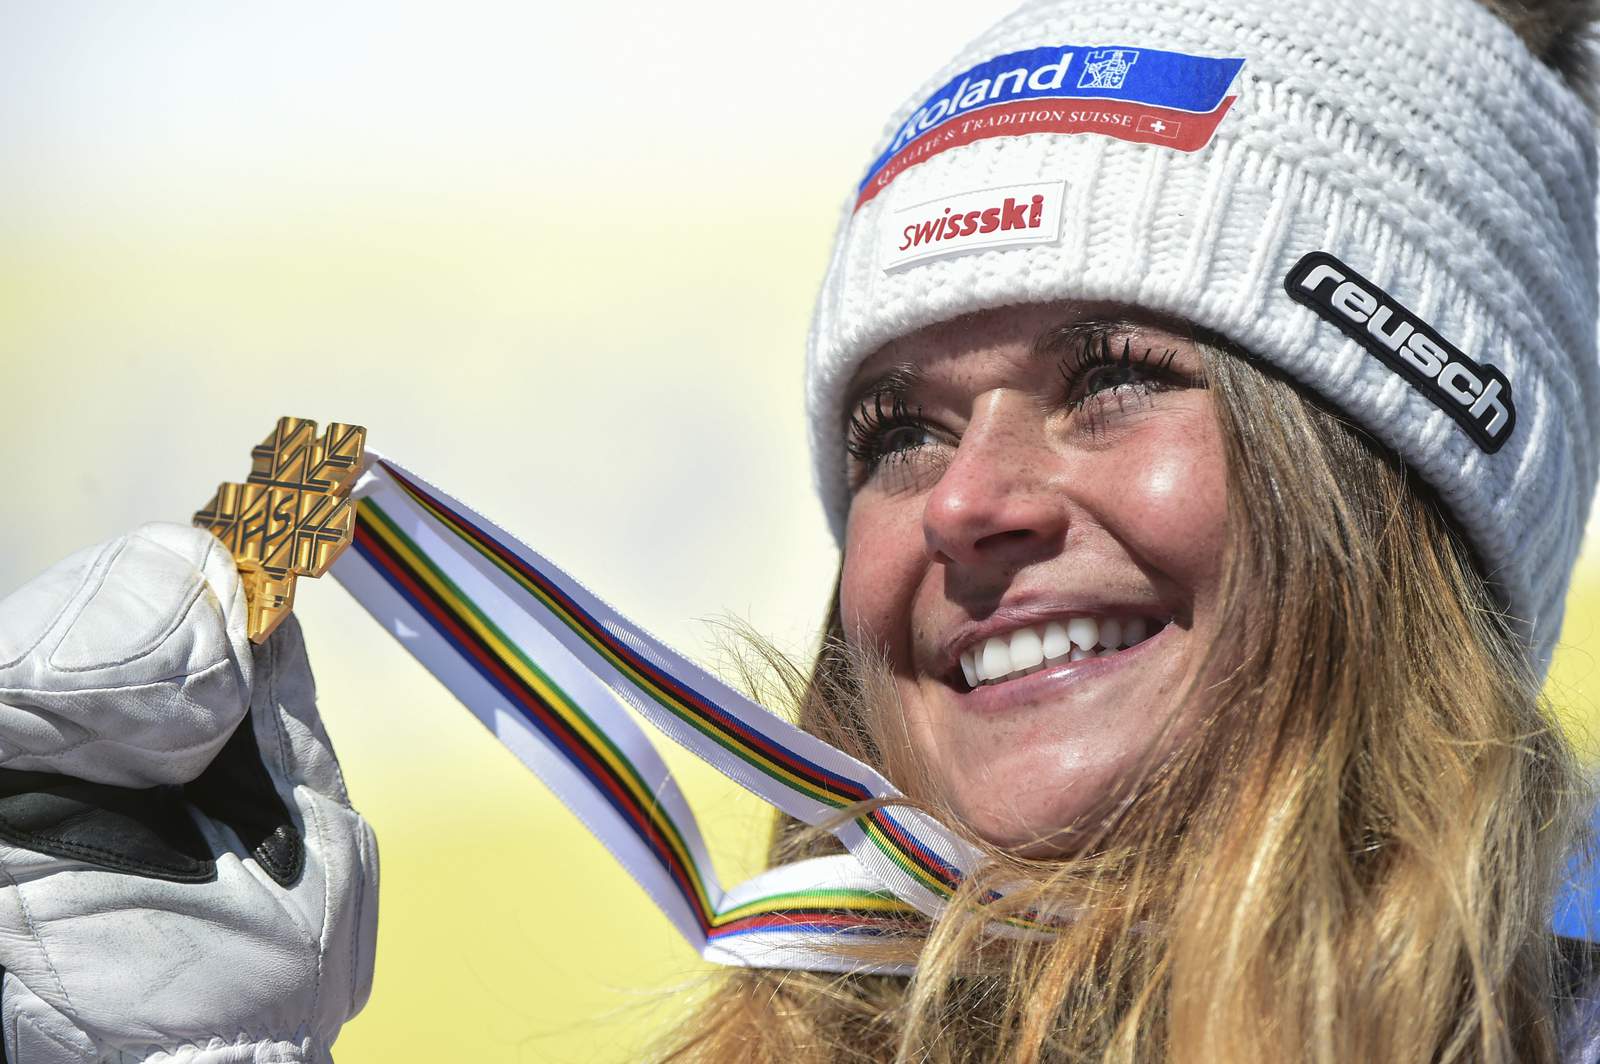 Riding high: Suter wins downhill for her 1st gold at worlds